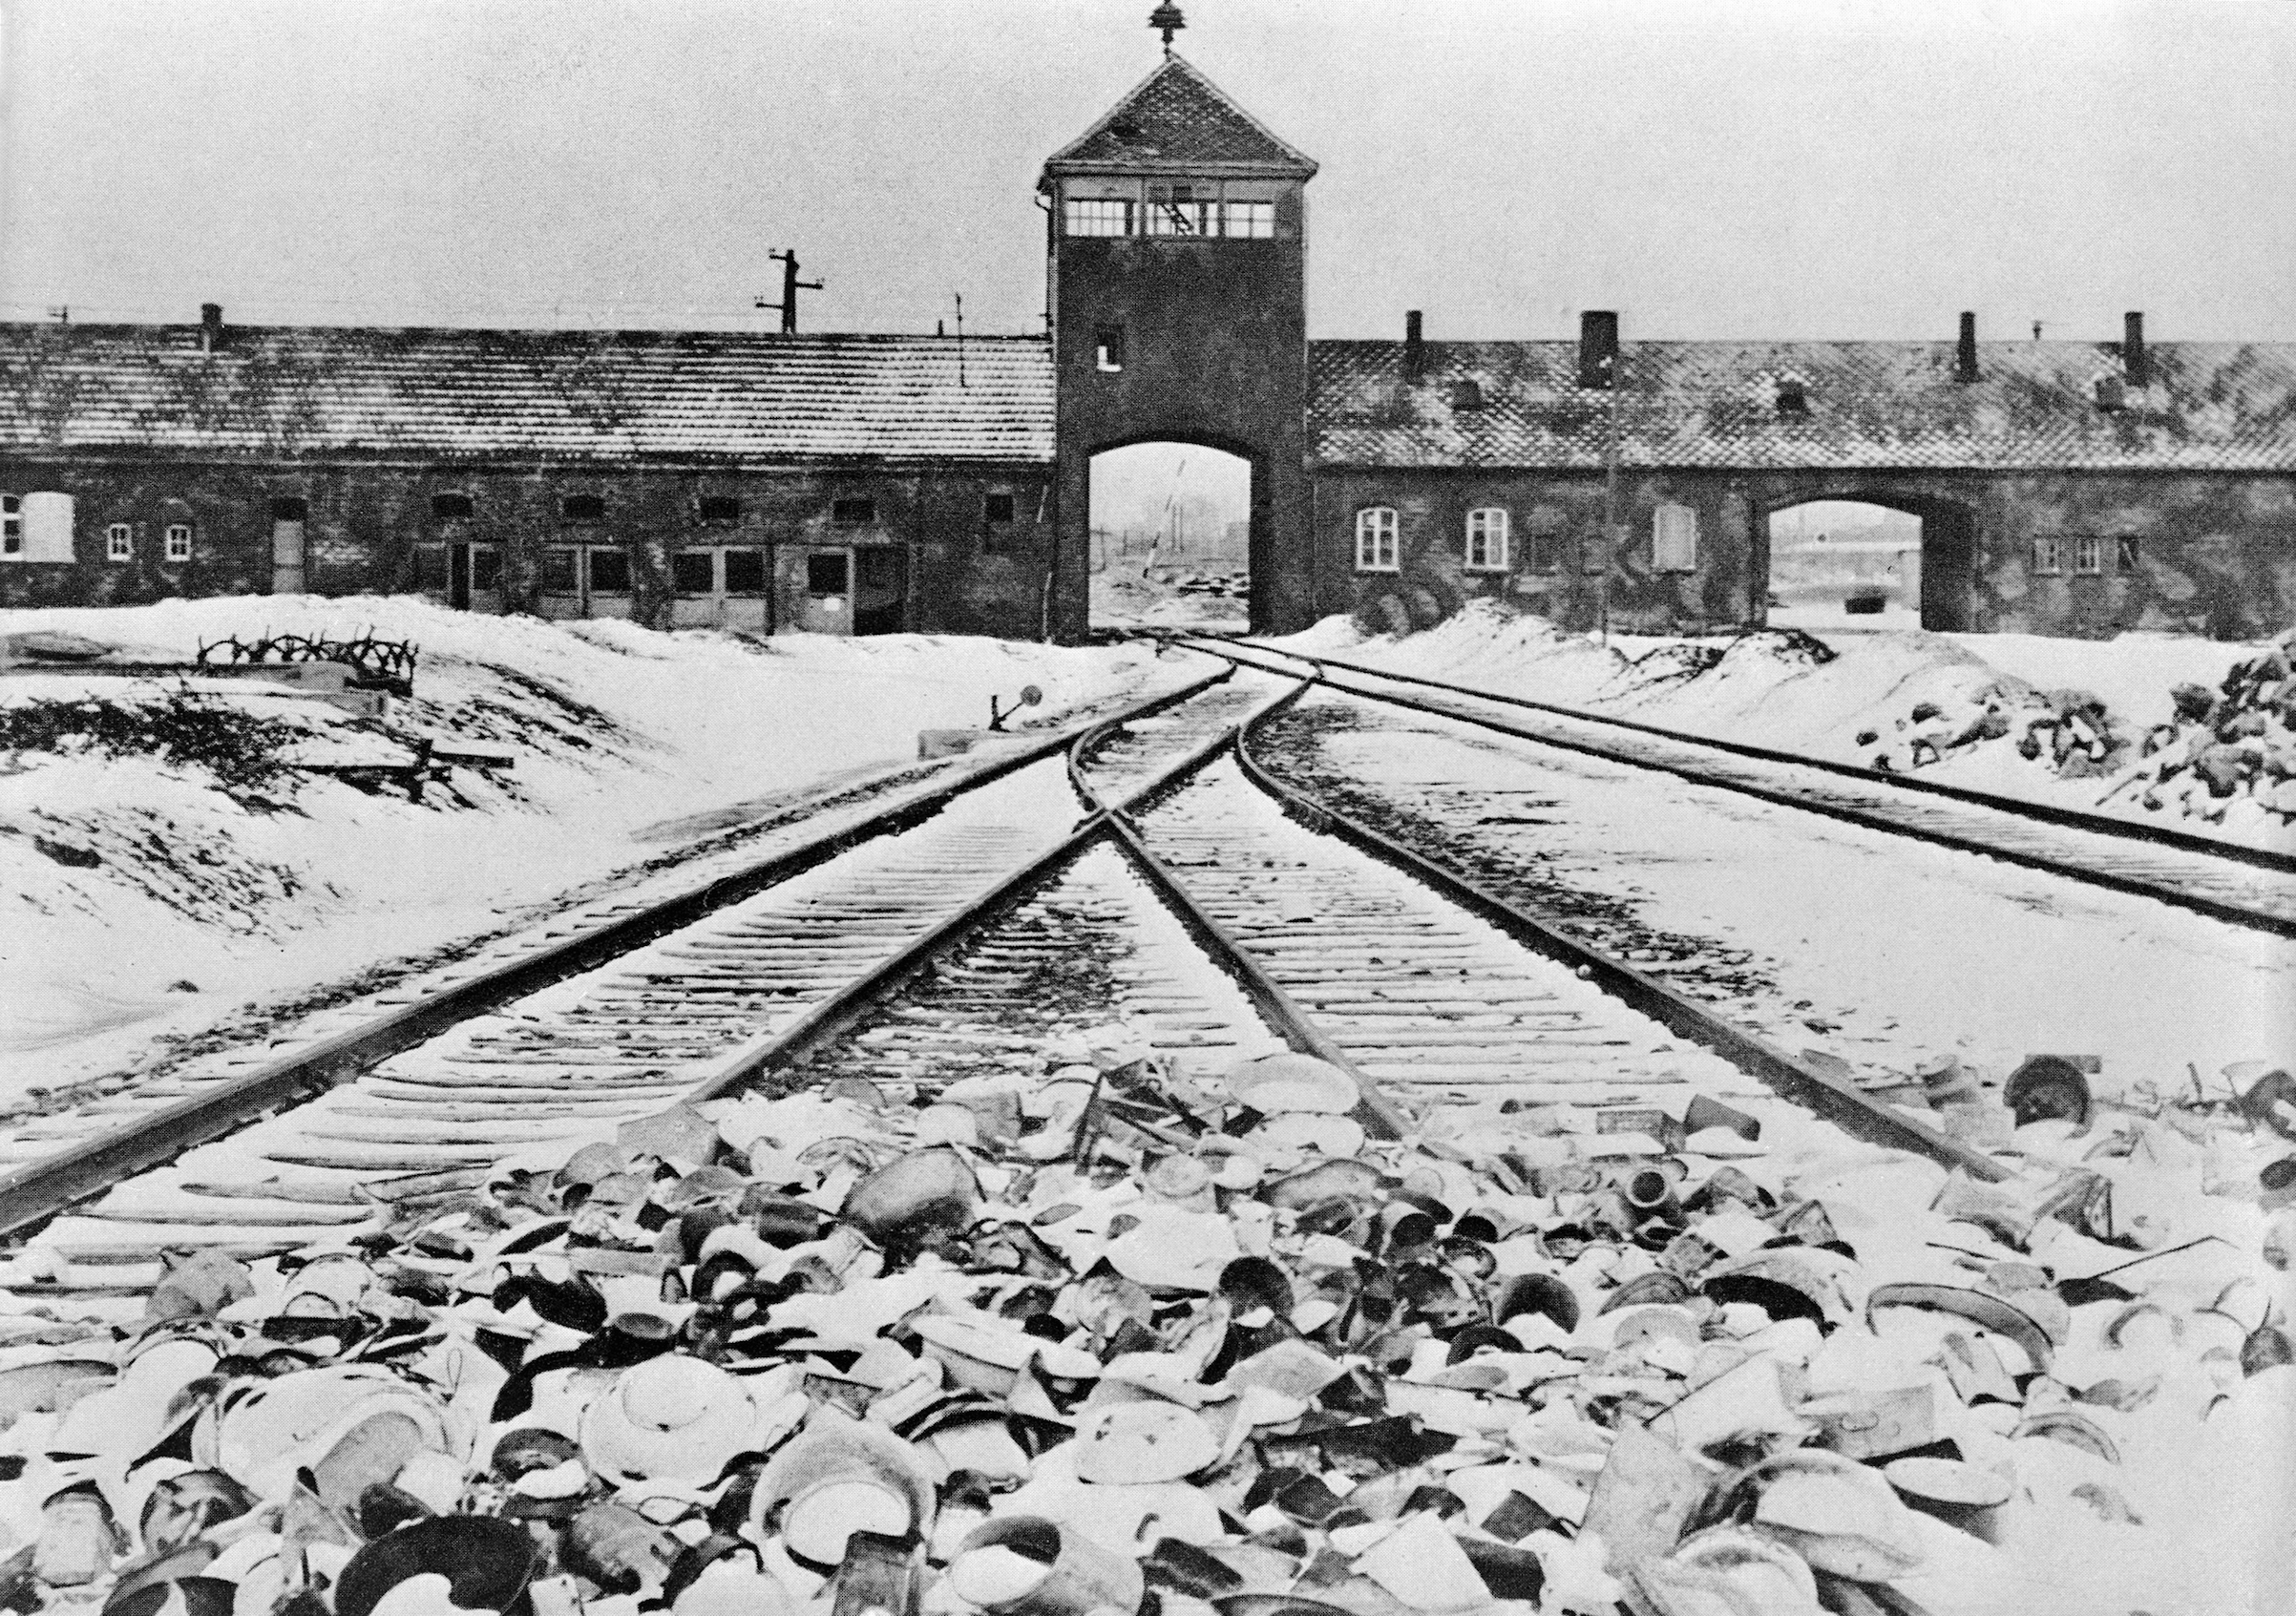 Entrance to the German concentration camp of Auschwitz-Birkenau in Poland. Undated photograph. (Bettmann/Getty Images)